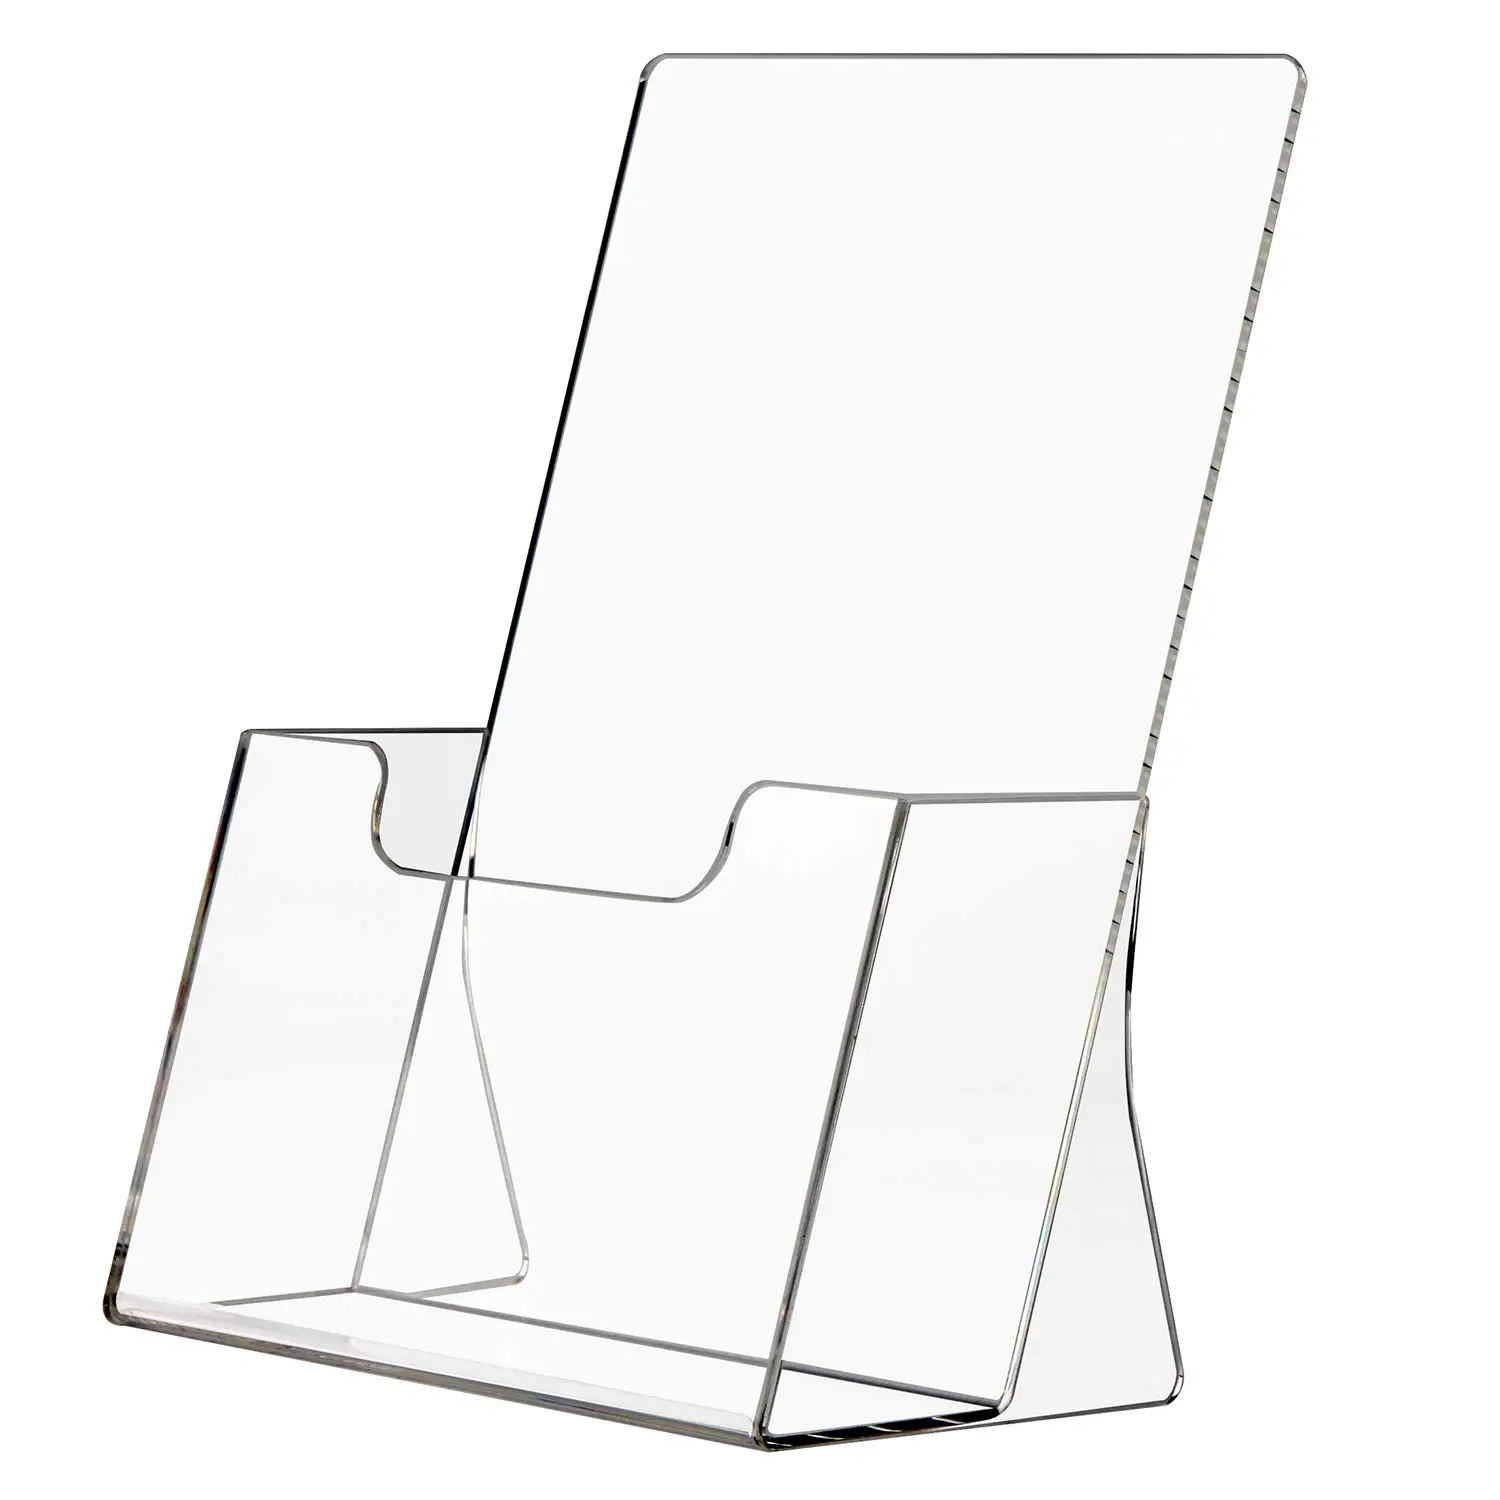 Clear Acrylic Plastic Brochure Holder For Leaflet Display Stand - Buy ...